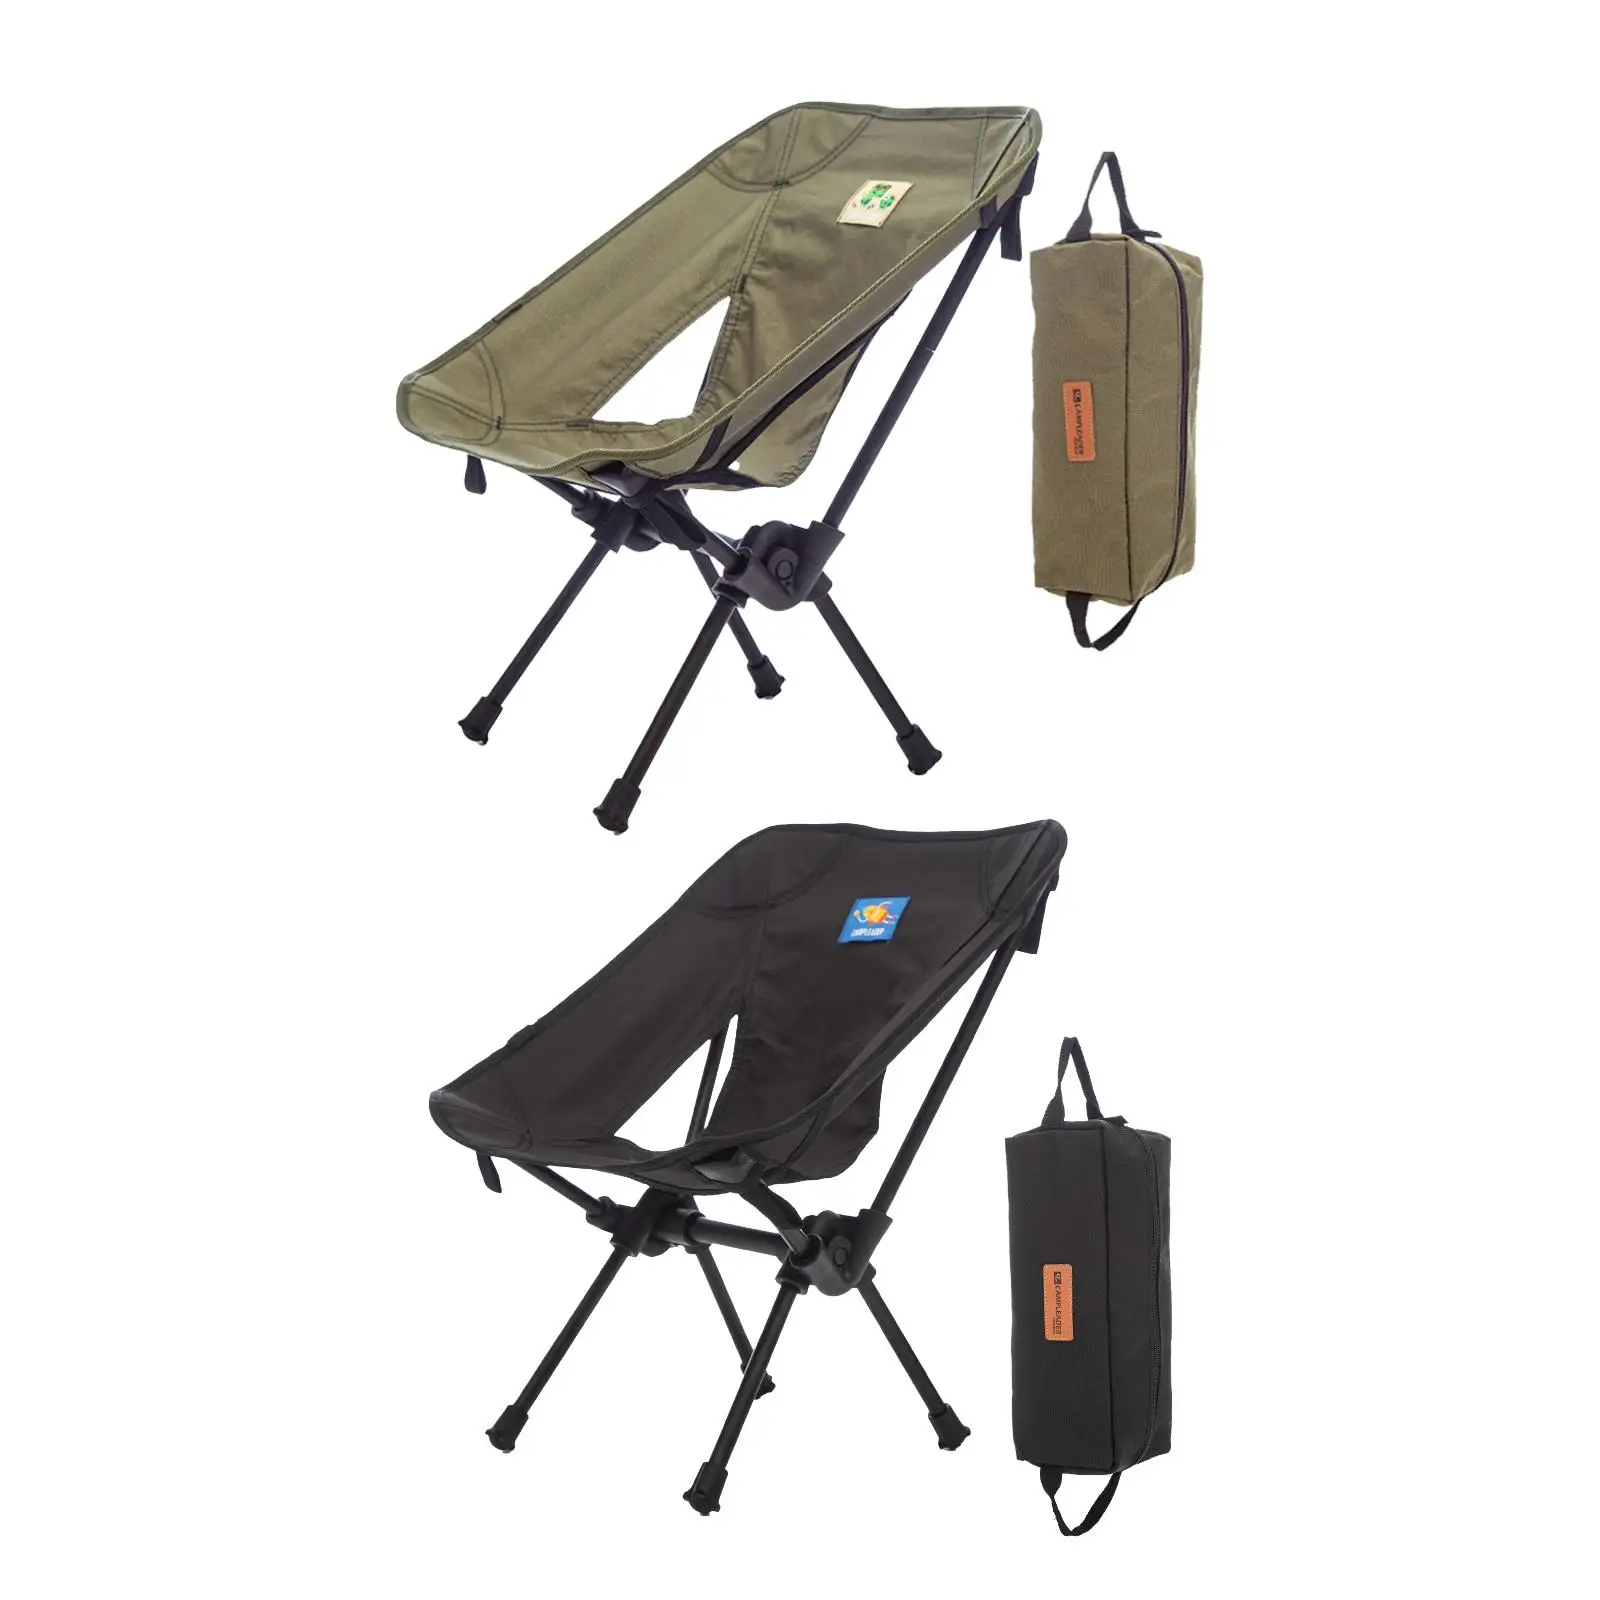 Aluminum Alloy Frame Camping Chair Stool Folding W/Storage Pouch Outdoor Children Seat for Travel Fishing Hiking Beach Barbecue